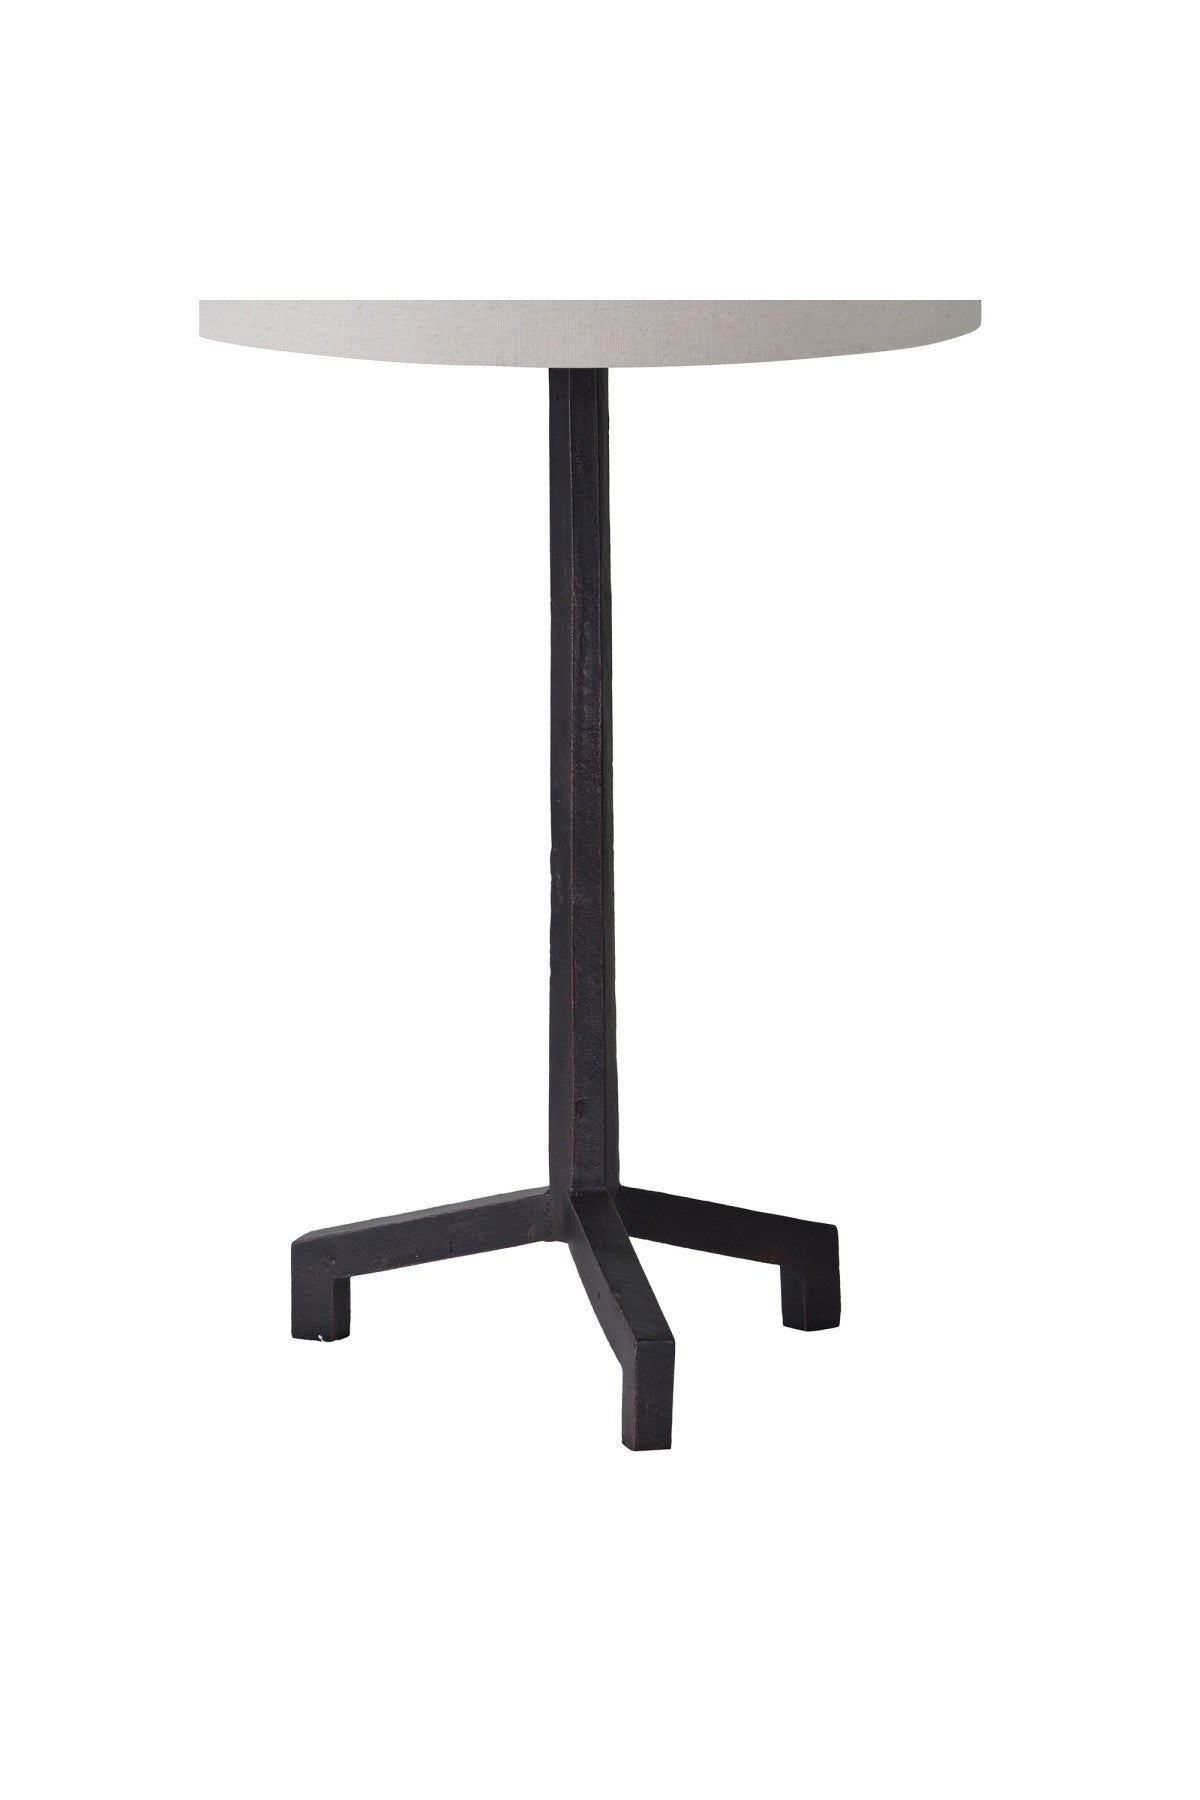 Citra Table Lamp